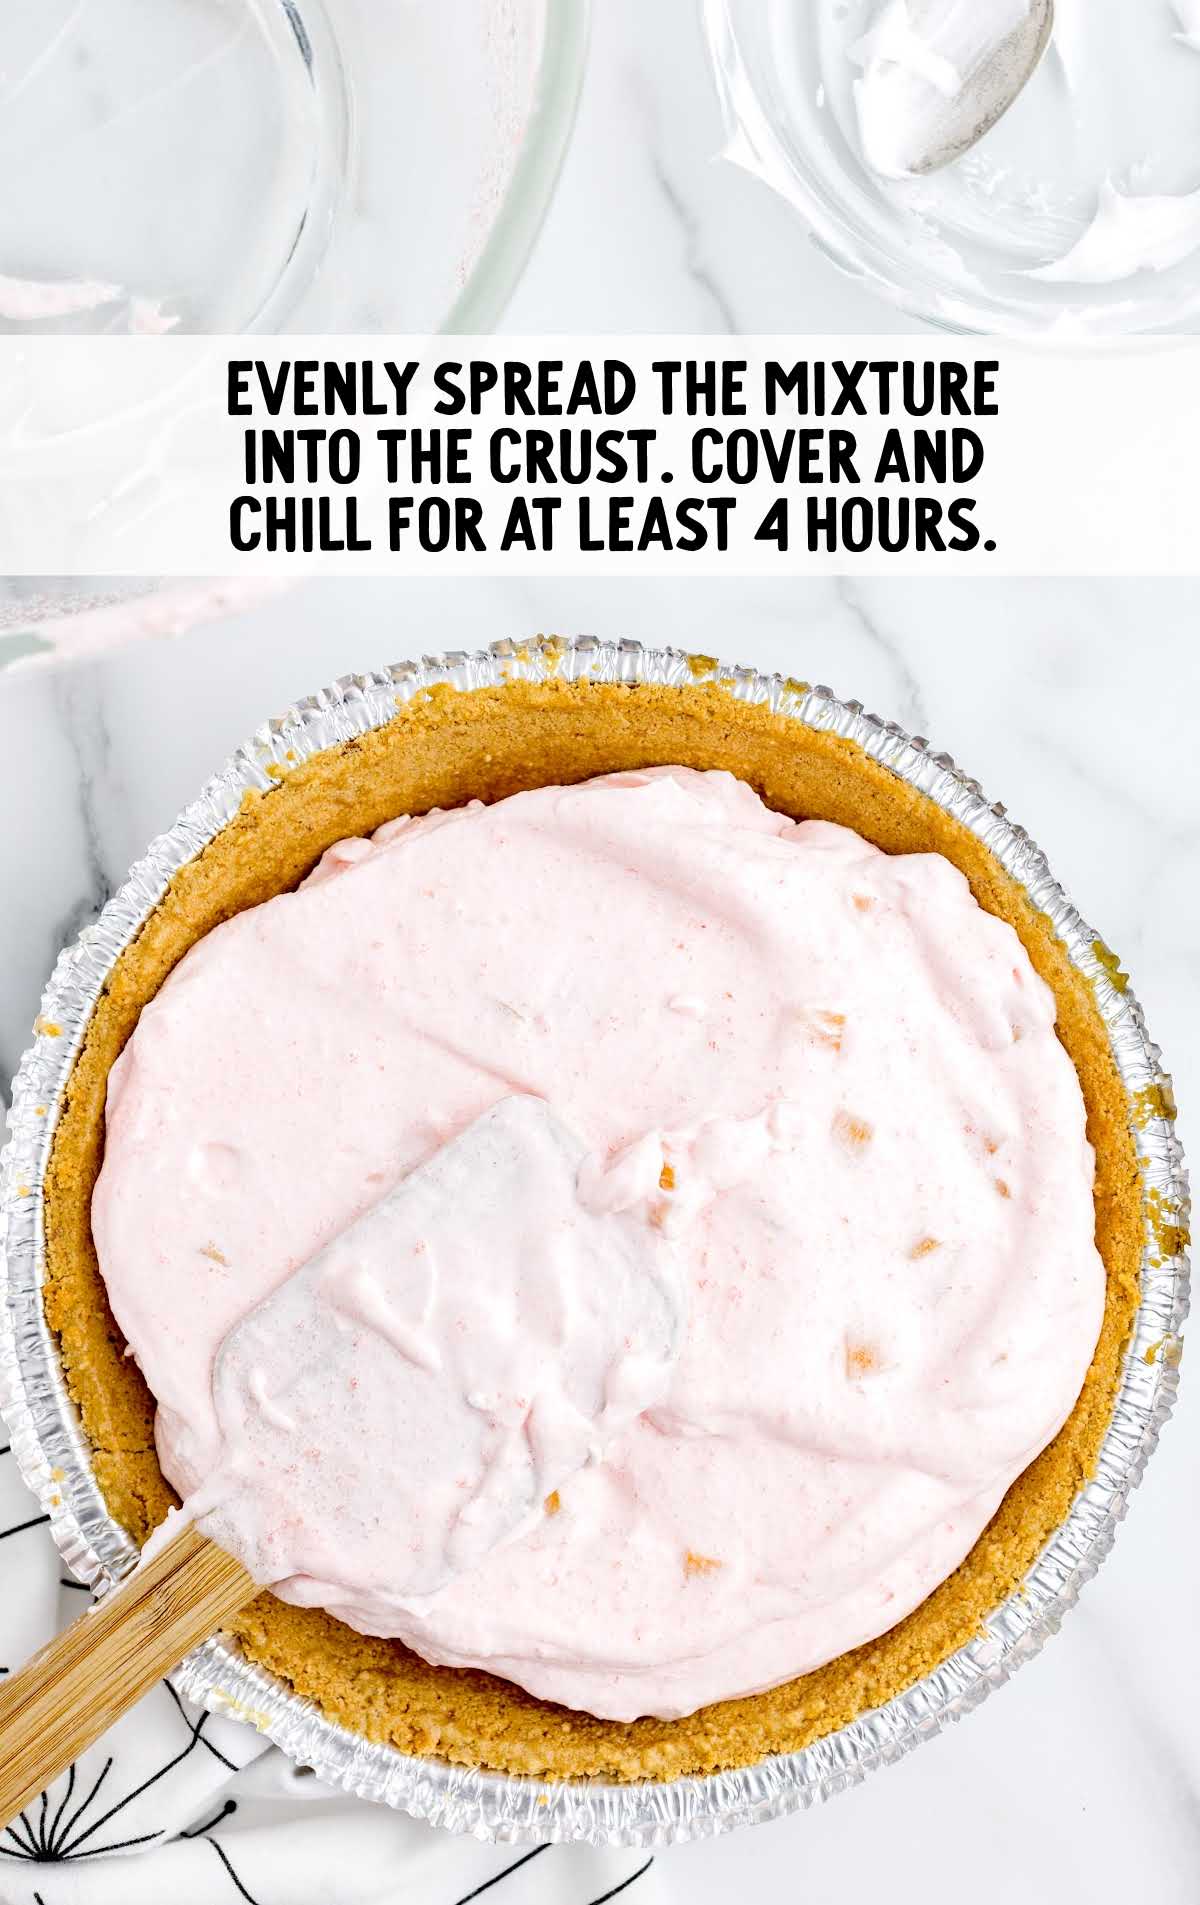 cool whip mixture spread into the crust